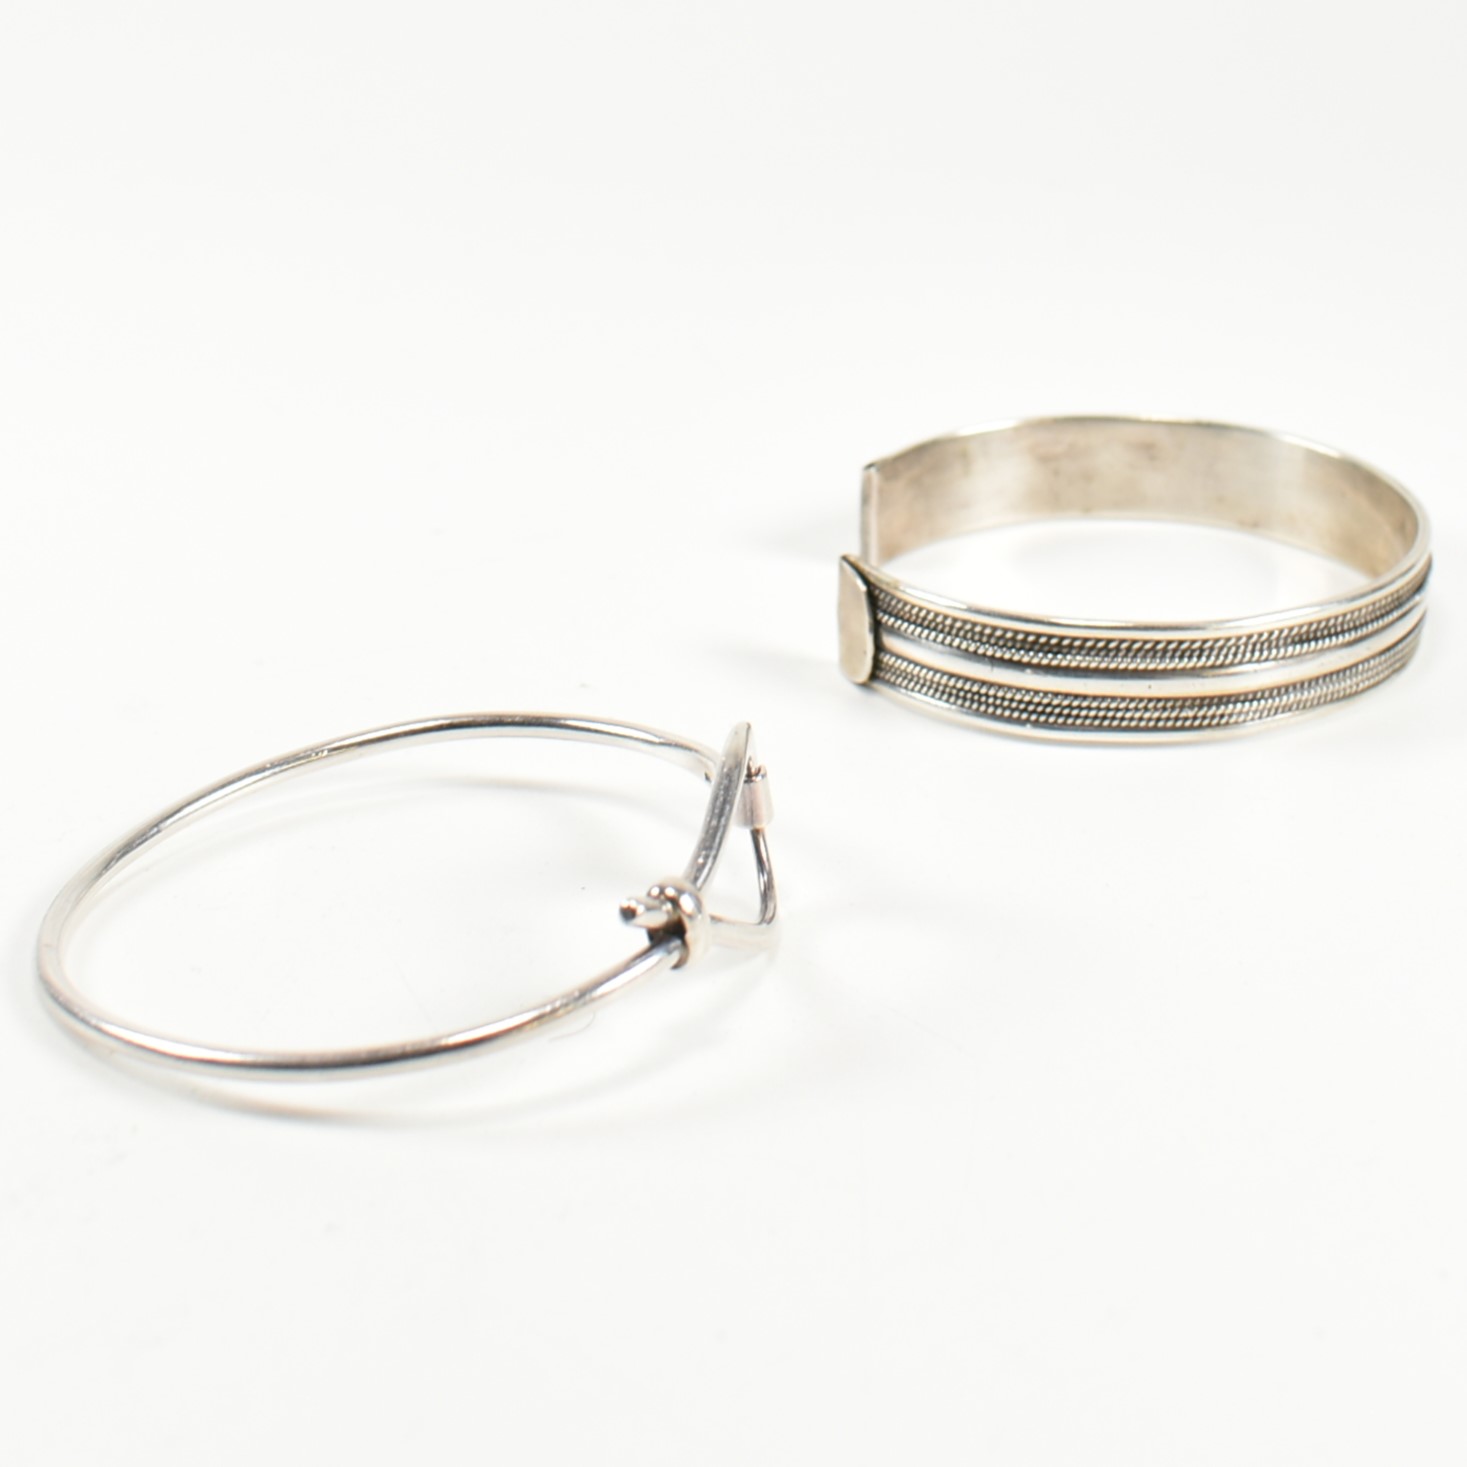 TWO SILVER BANGLES - Image 3 of 6